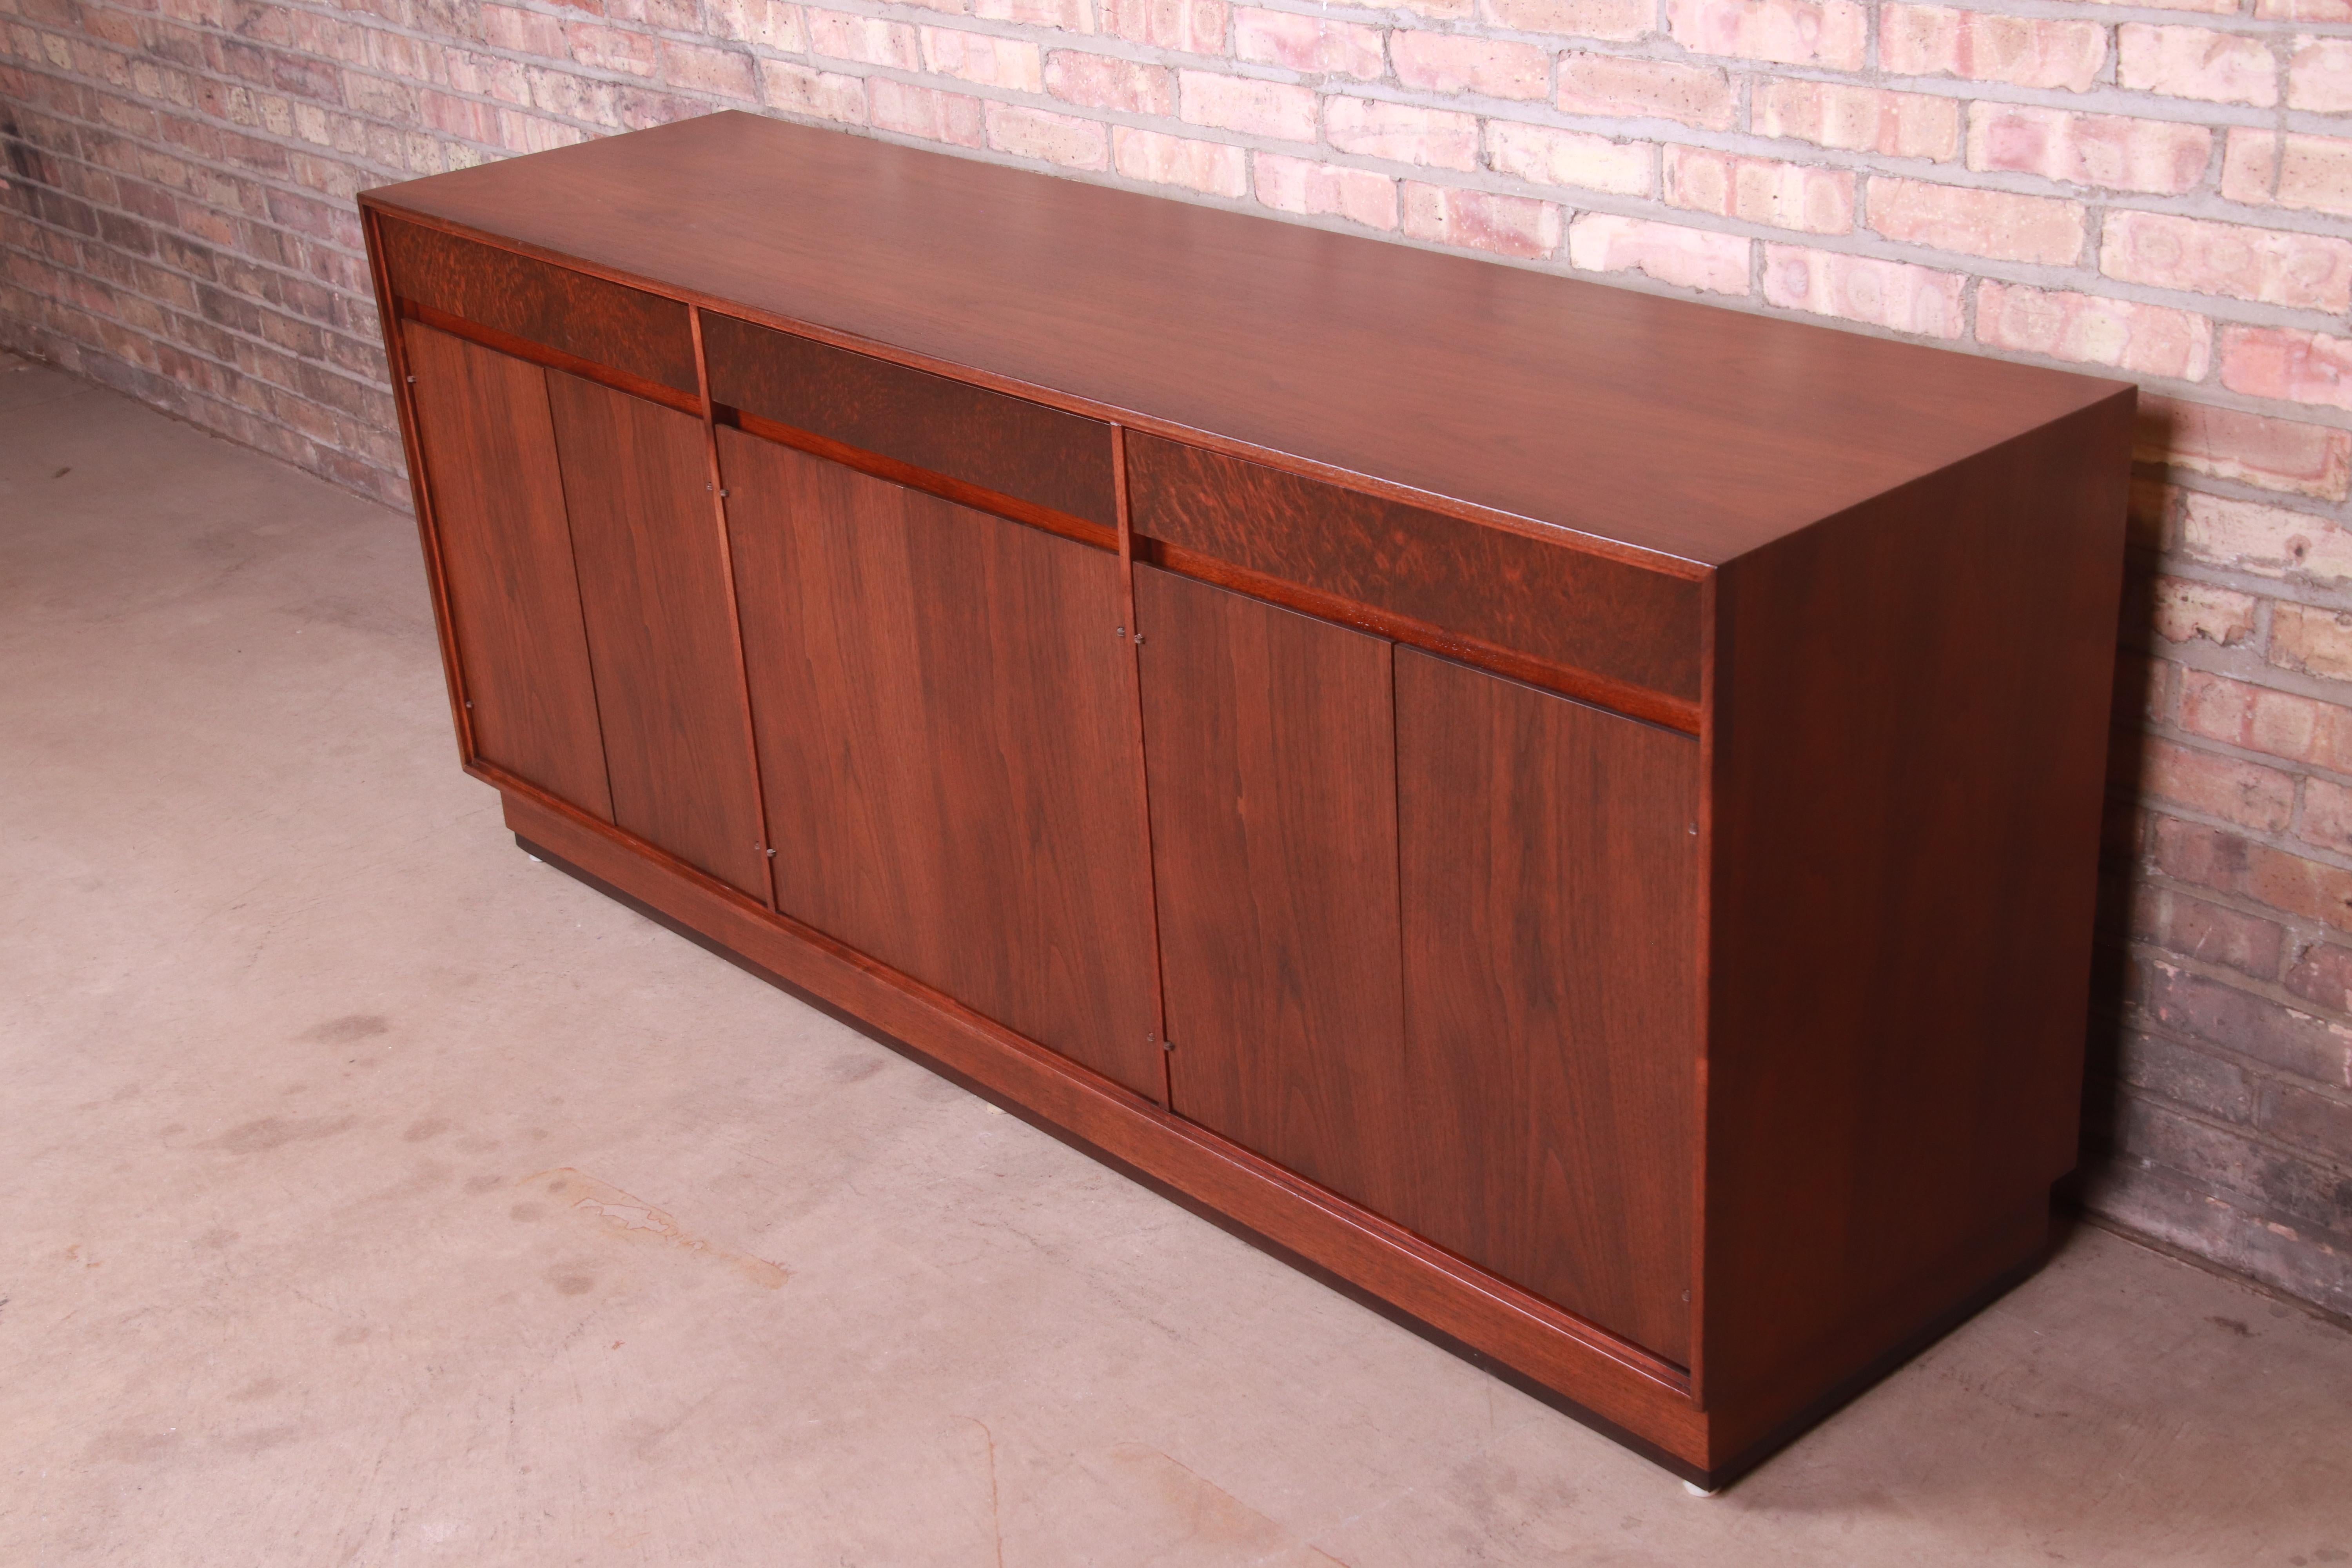 A gorgeous mid-century modern sideboard, credenza, or bar server

By John Stuart for Mount Airy

USA, 1950s

Black walnut, with burled walnut drawer fronts.

Measures: 72